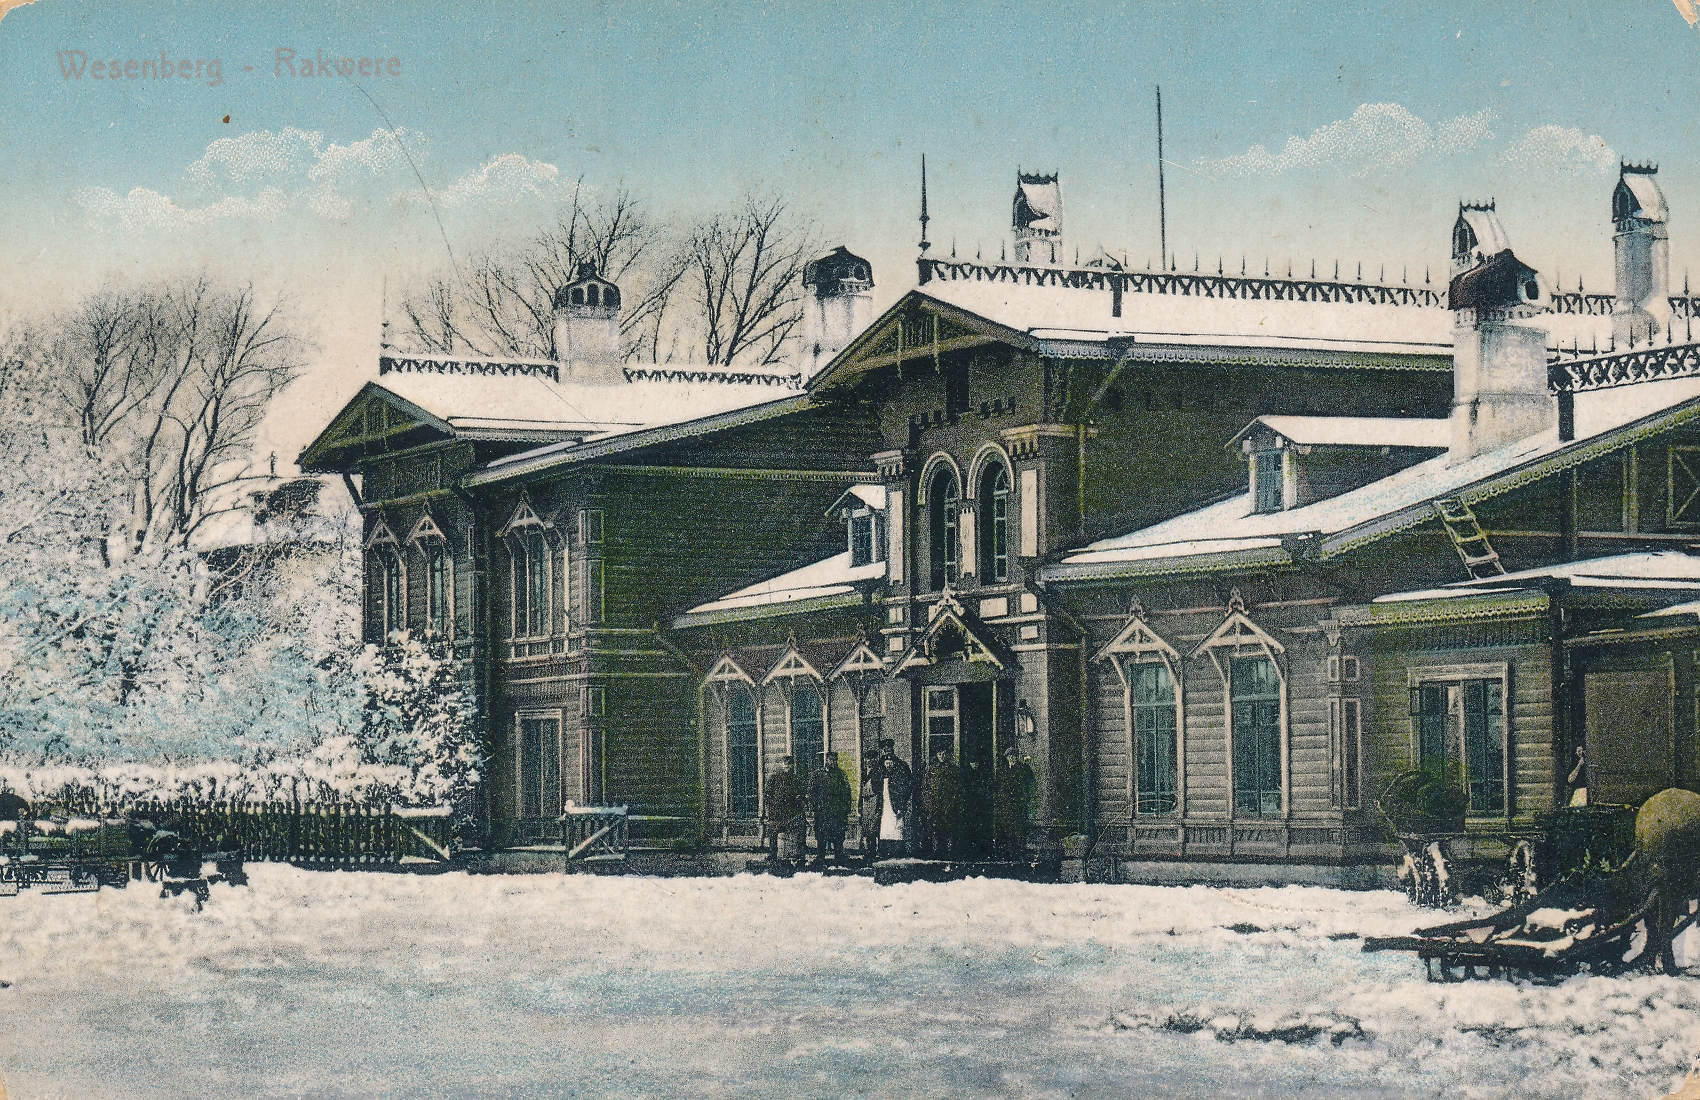 Rakvere's first station building from postcard - Rakvere's representative second class station building from postcard